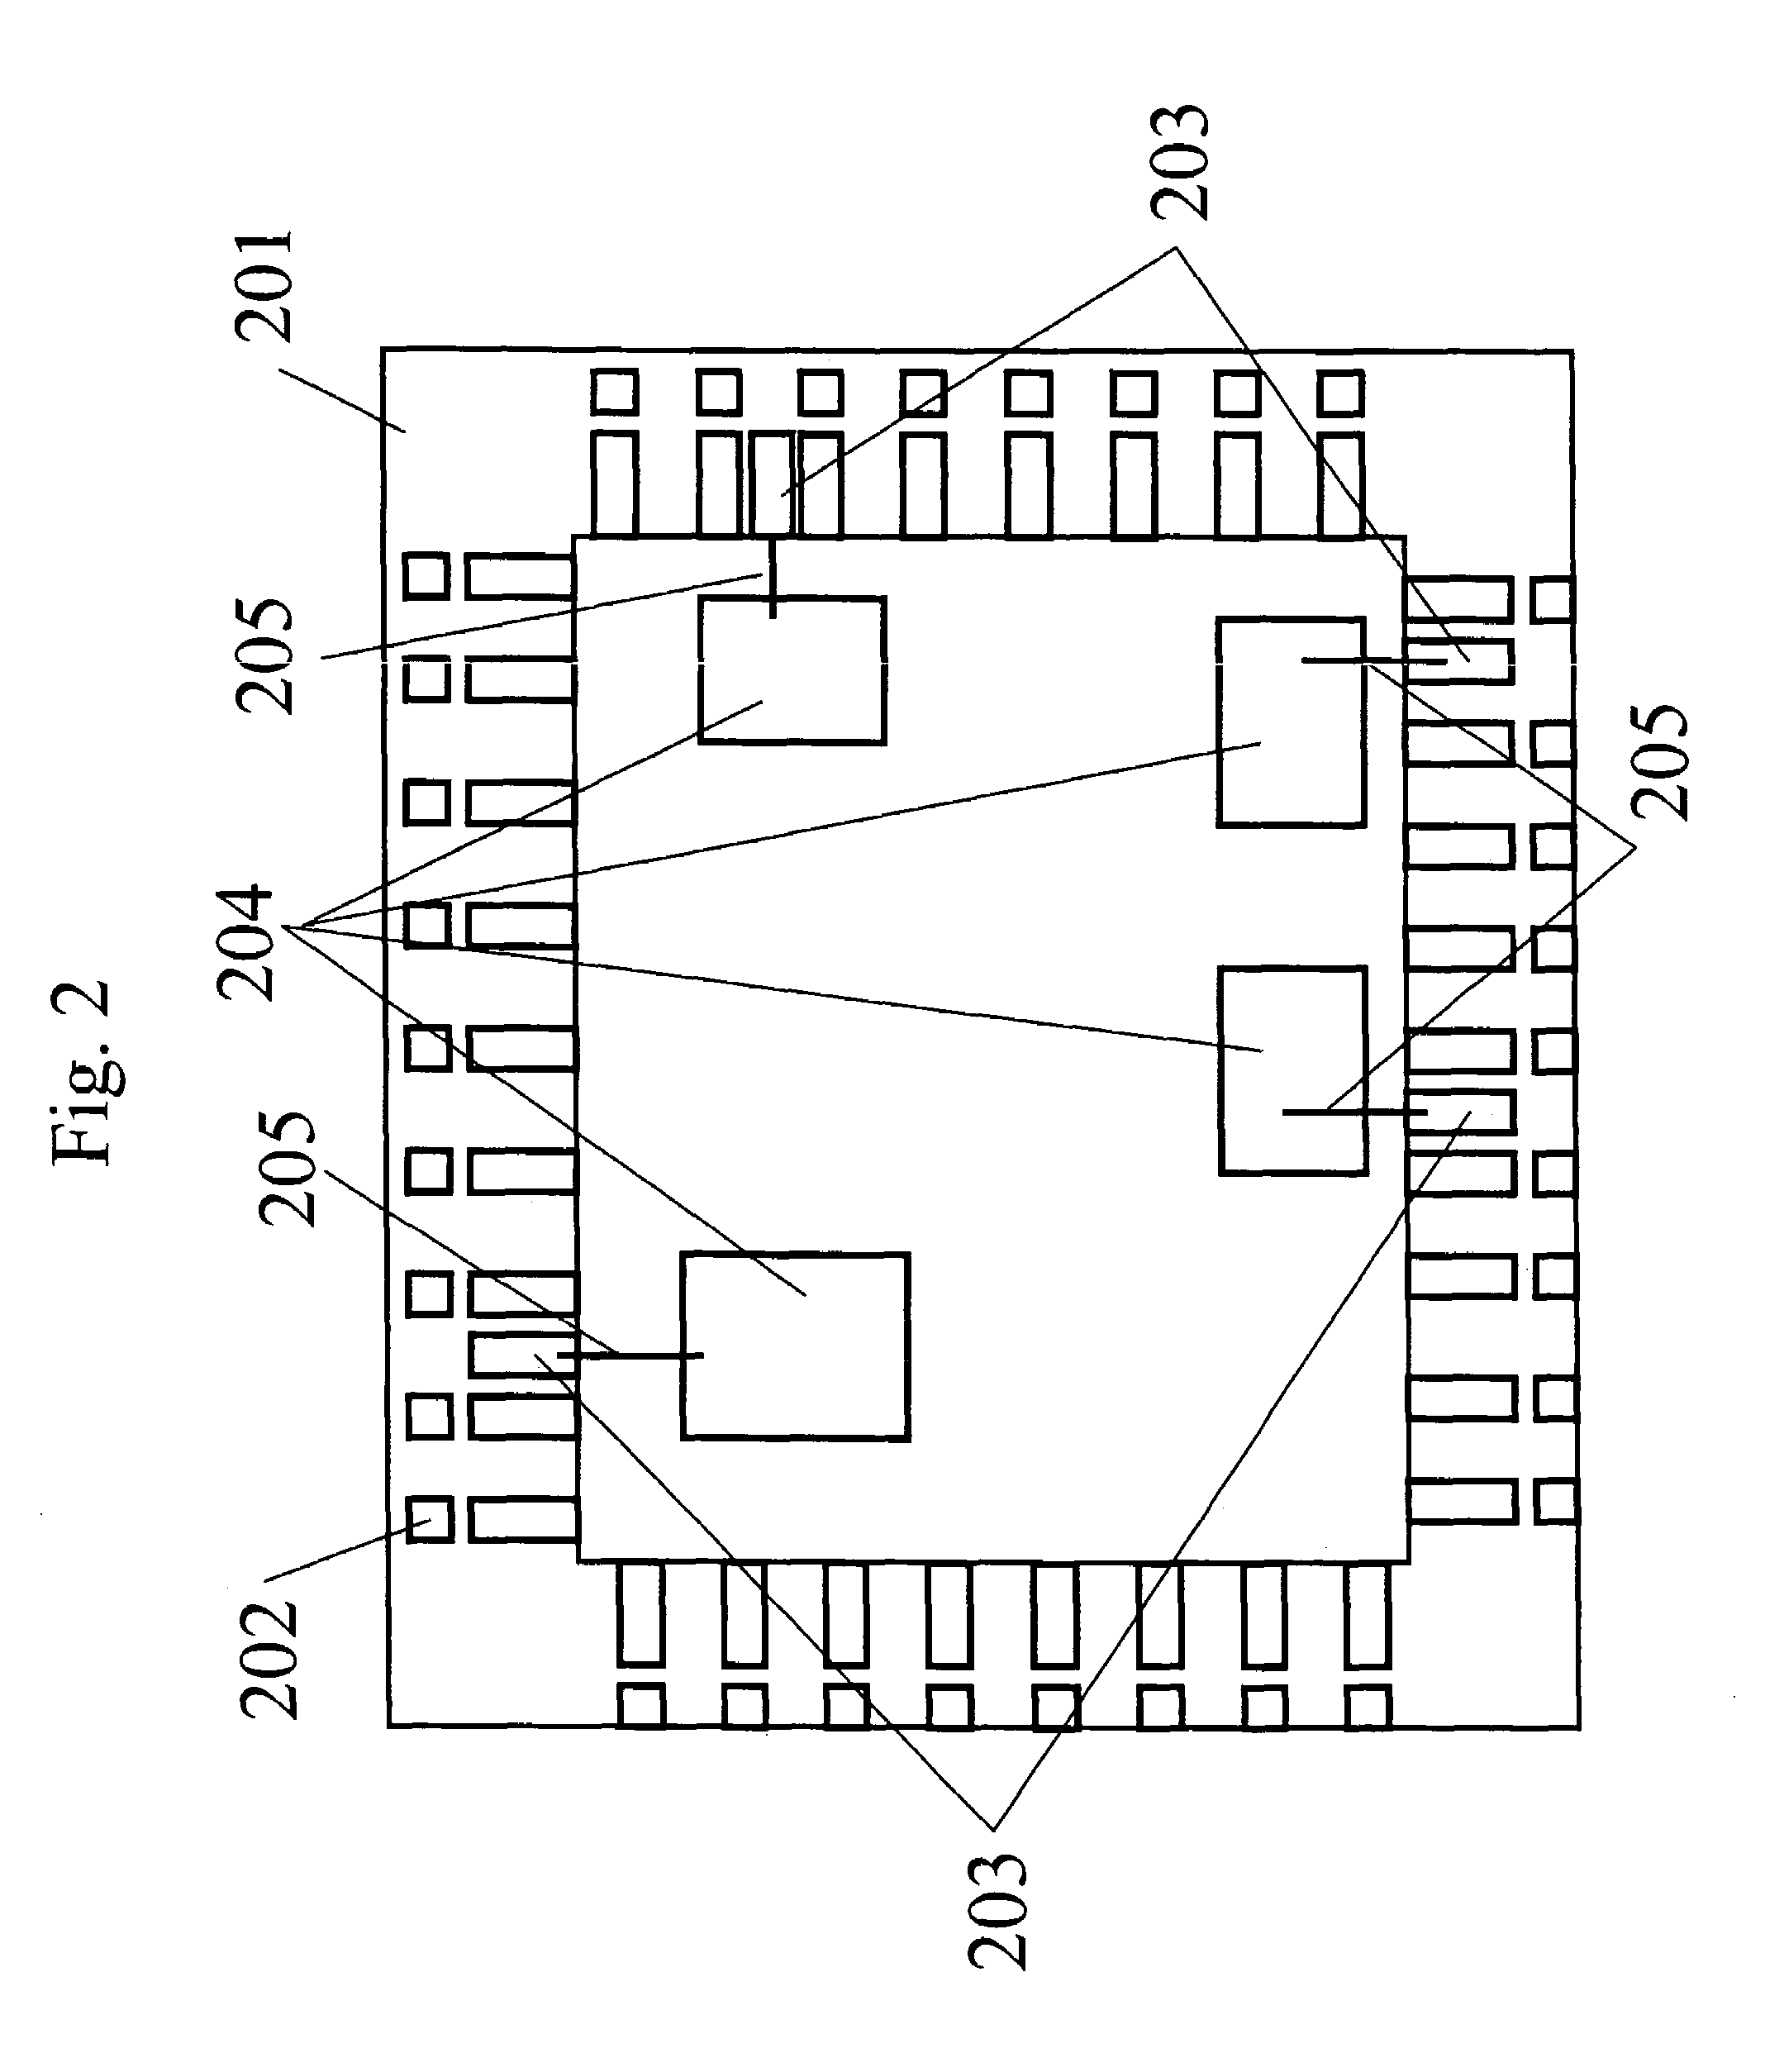 Semiconductor device with a nonvolatile semiconductor memory circuit and a plurality of IO blocks